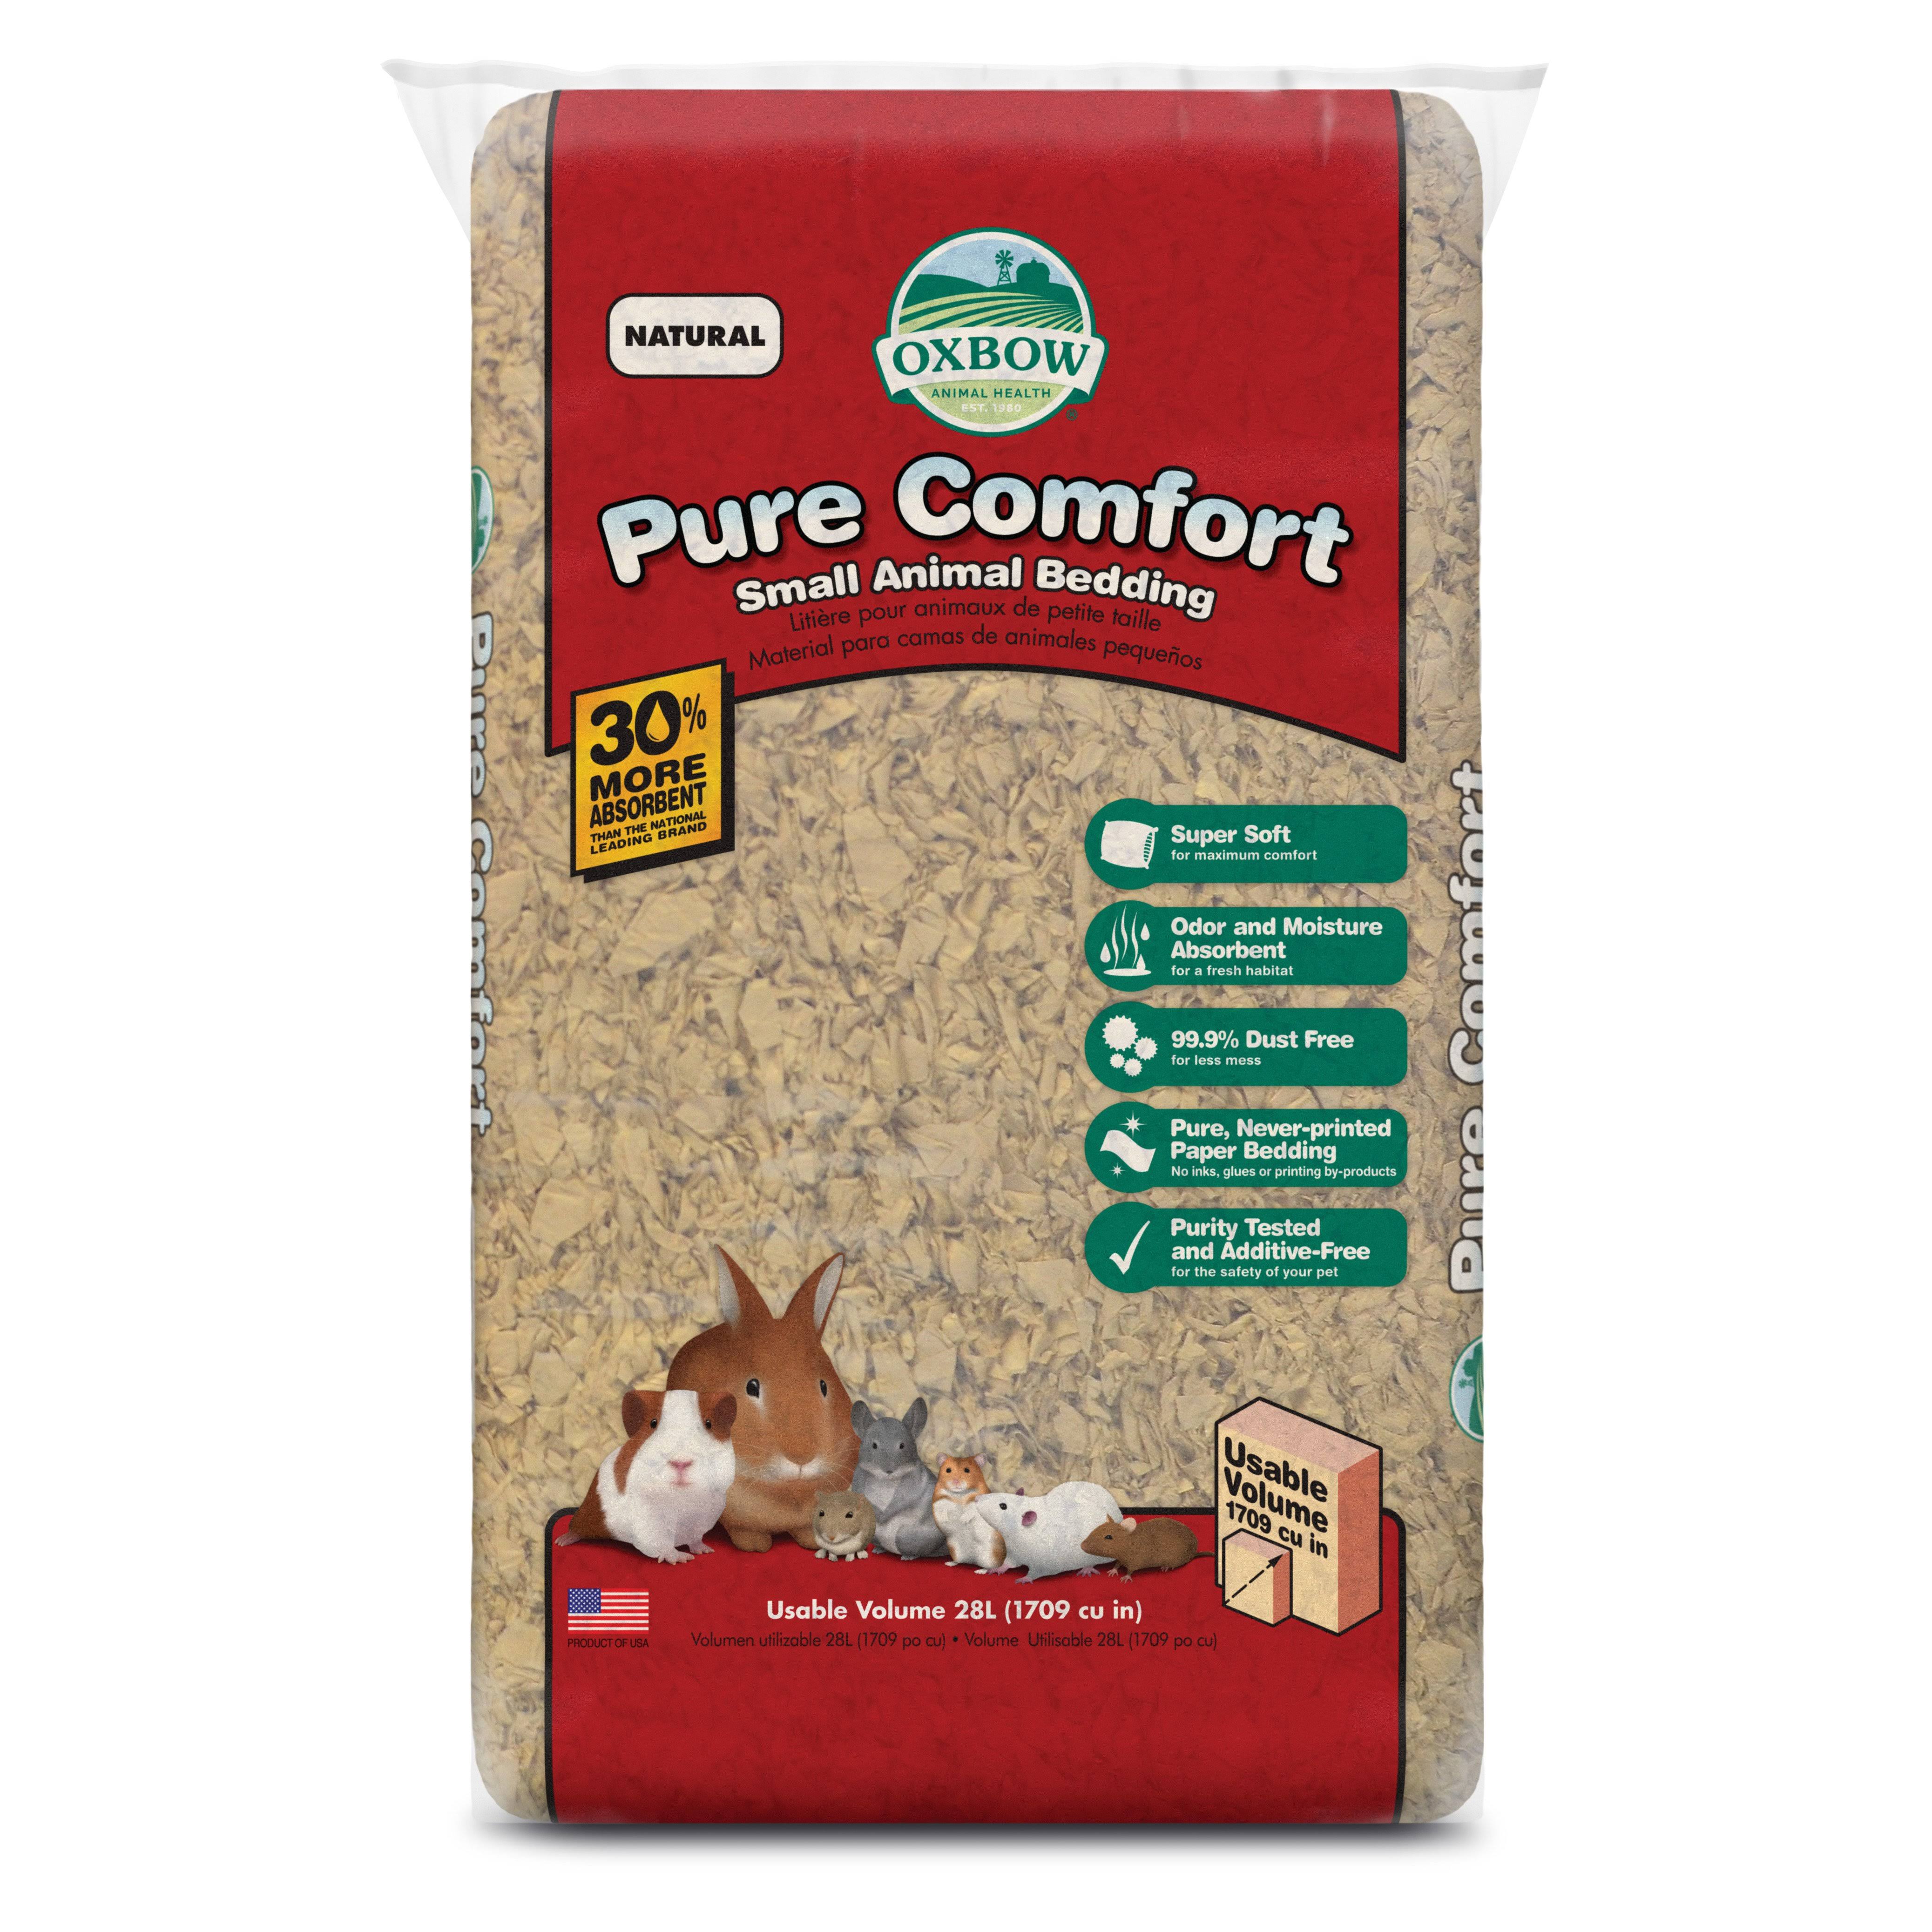 Oxbow Pure Comfort Small Animal Bedding - Natural, 27L